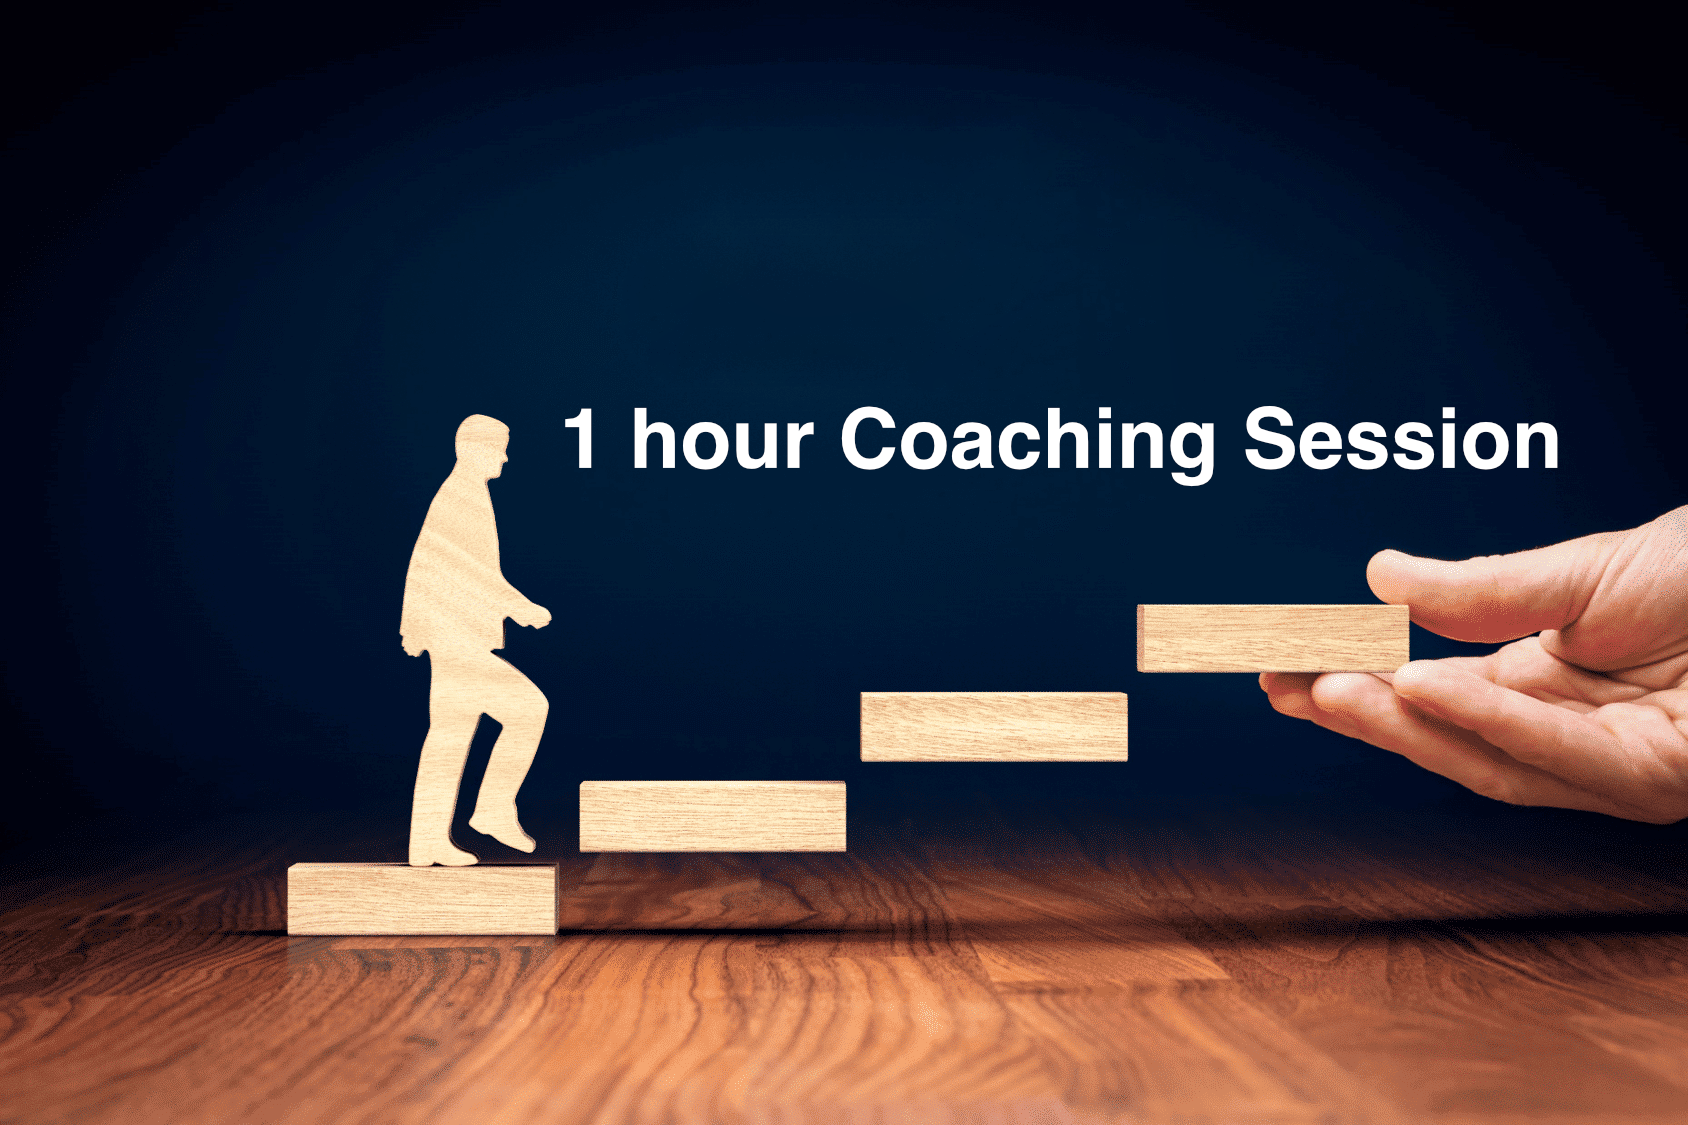 1 hour coaching sessions